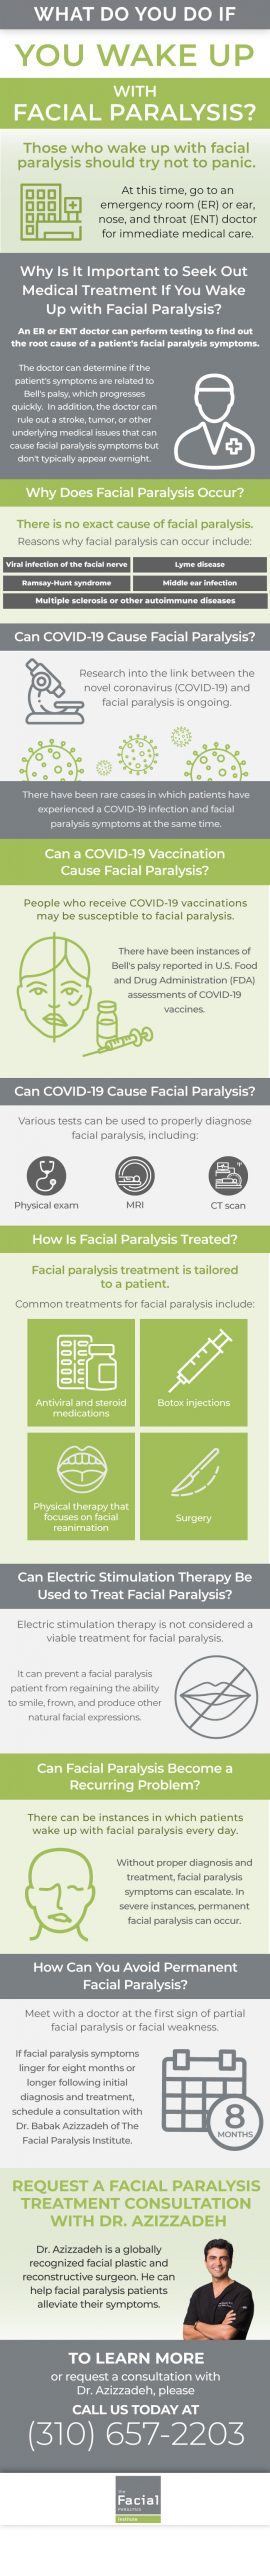 What to Do if You Wake Up with Facial Paralysis Infographic